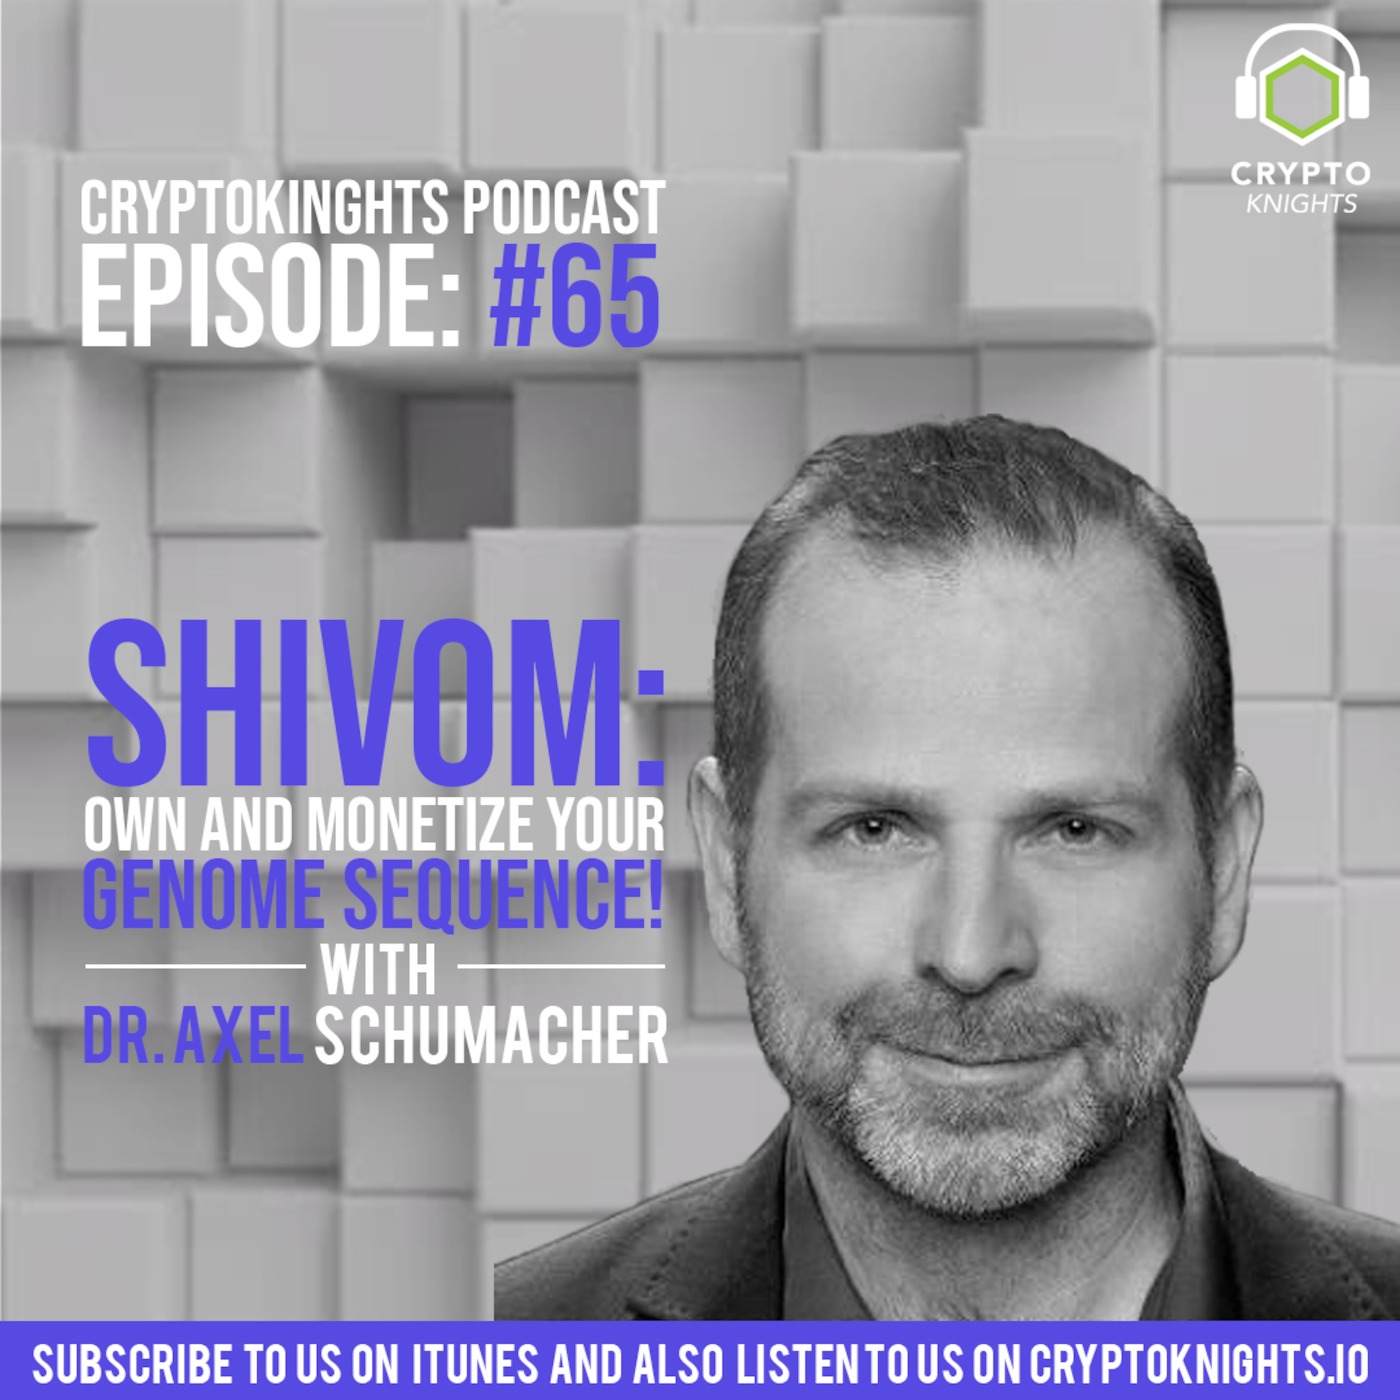 Episode 65 - Shivom: Own and Monetize Your Genome Sequence!